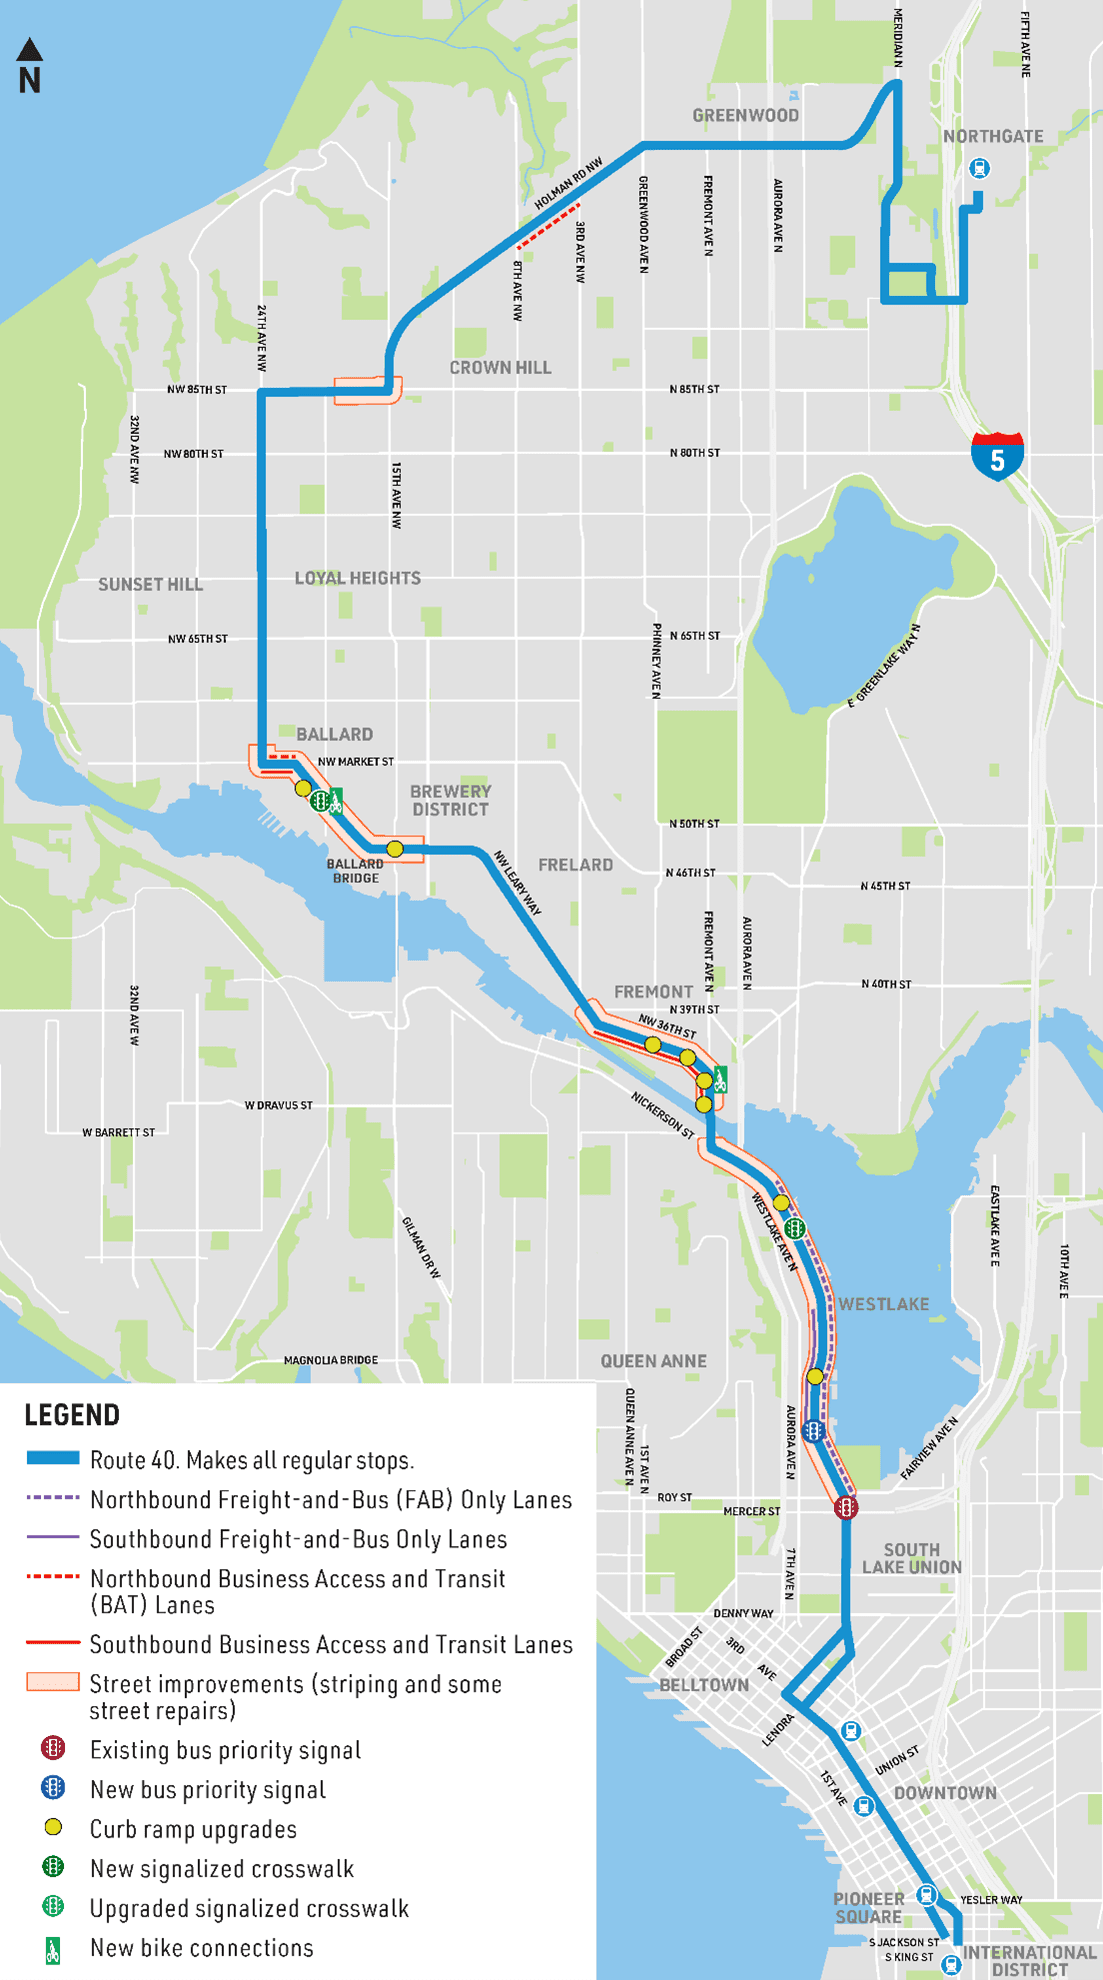 A map of the Route 40 corridor, including key areas of planned improvements at Westlake, Fremont, Ballard, and North Seattle areas.